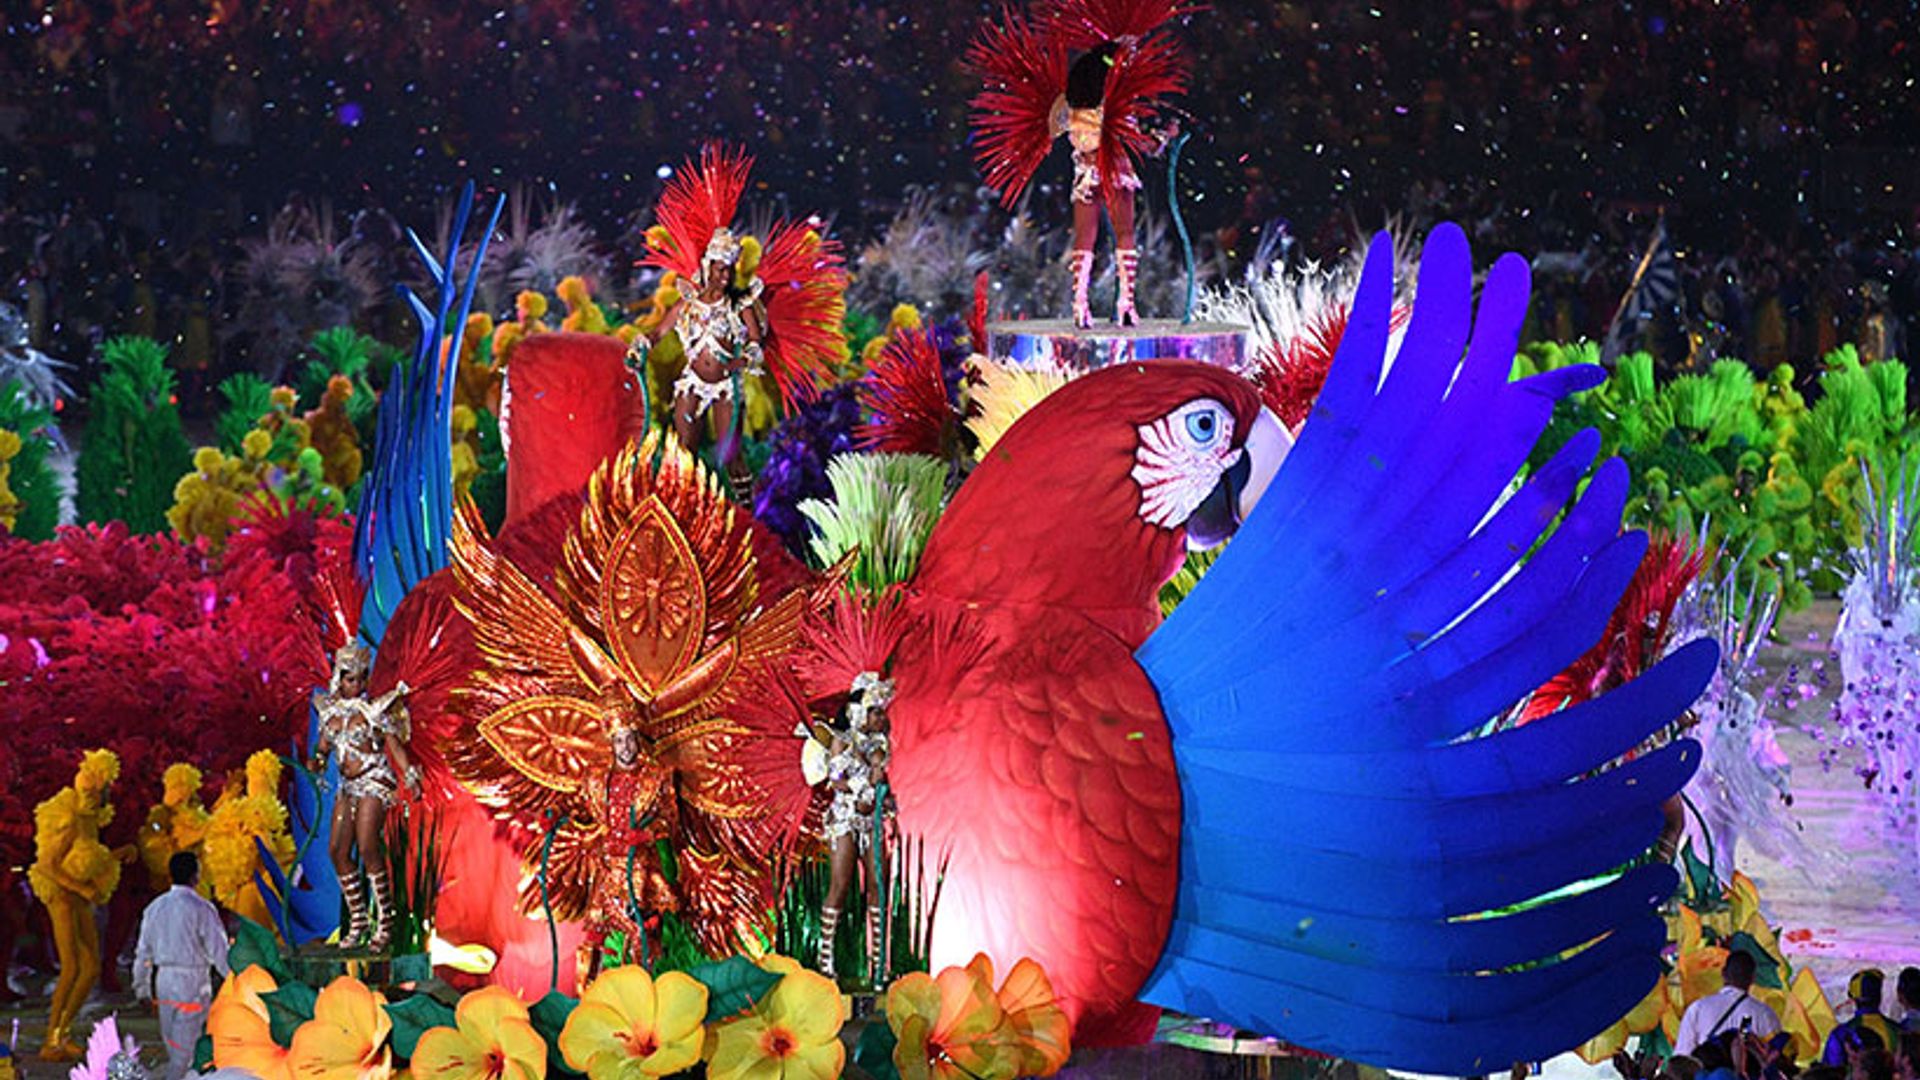 Rio 2016: Highlights from the spectacular closing ceremony